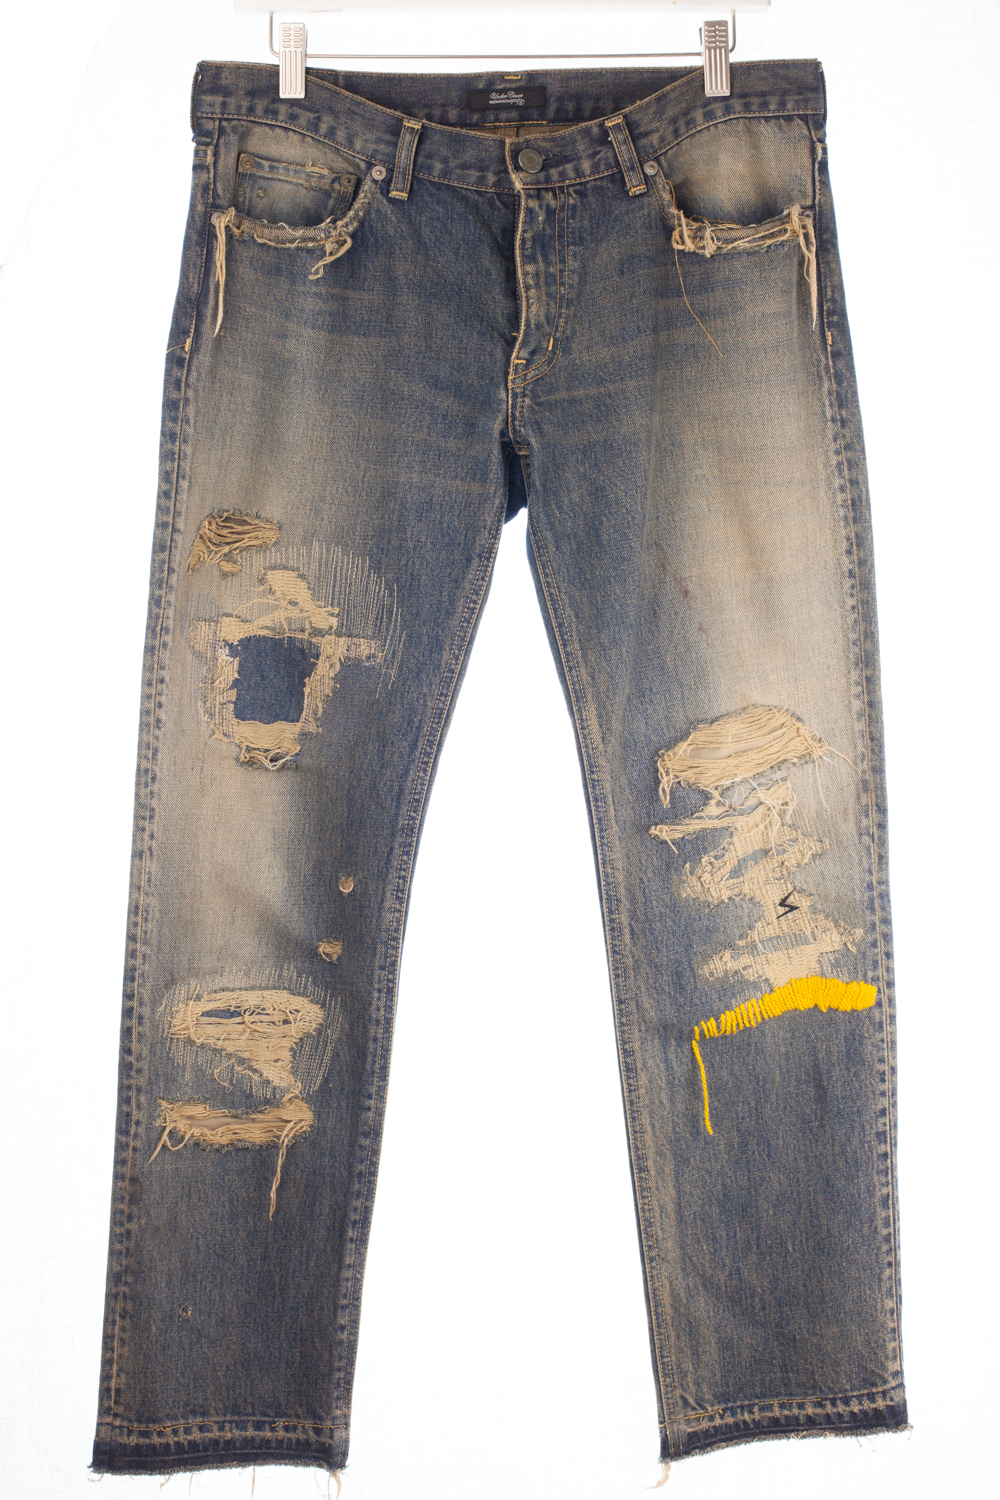 undercover distressed jeans